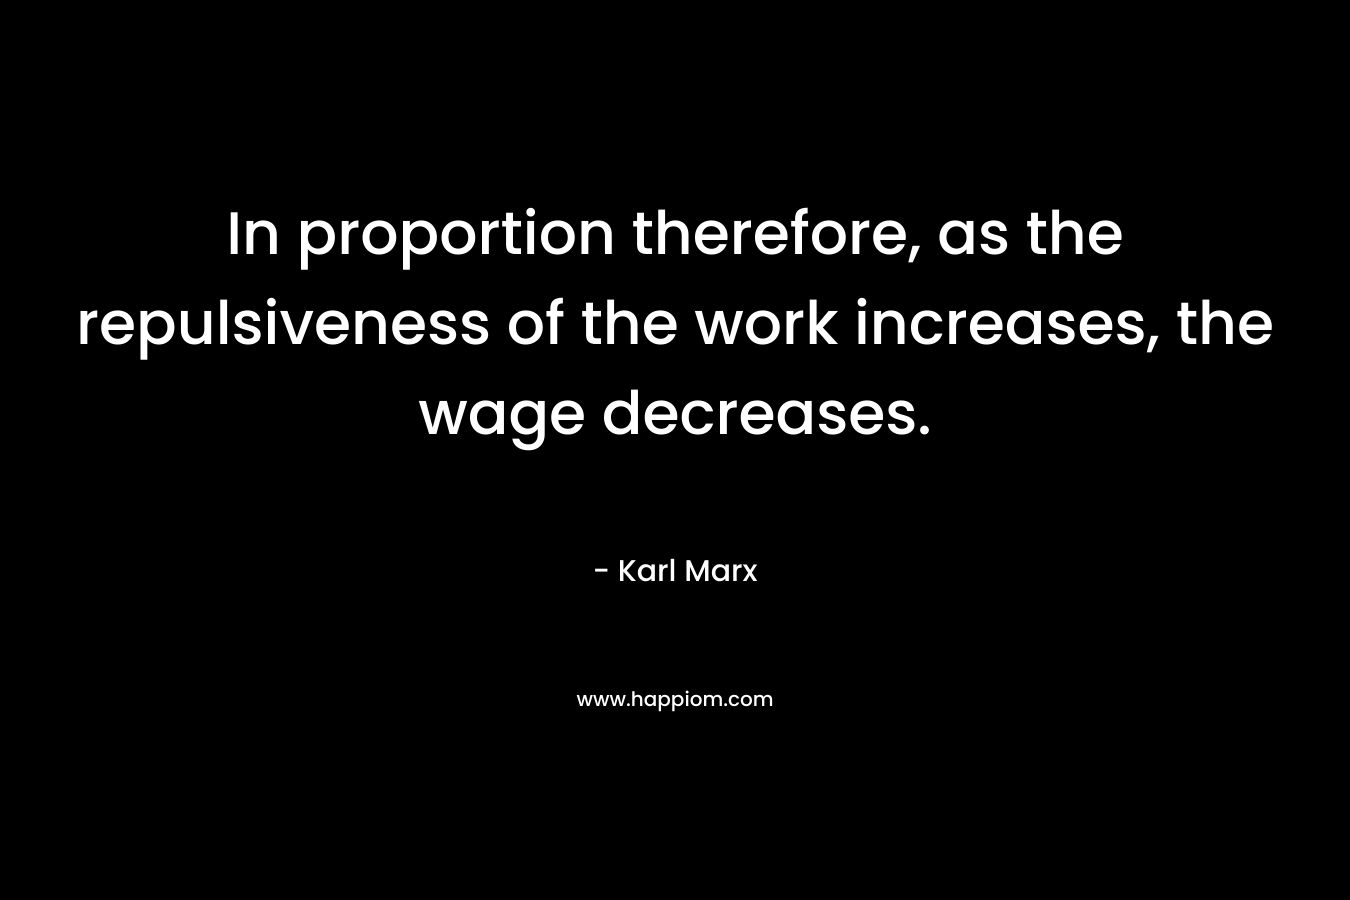 In proportion therefore, as the repulsiveness of the work increases, the wage decreases.